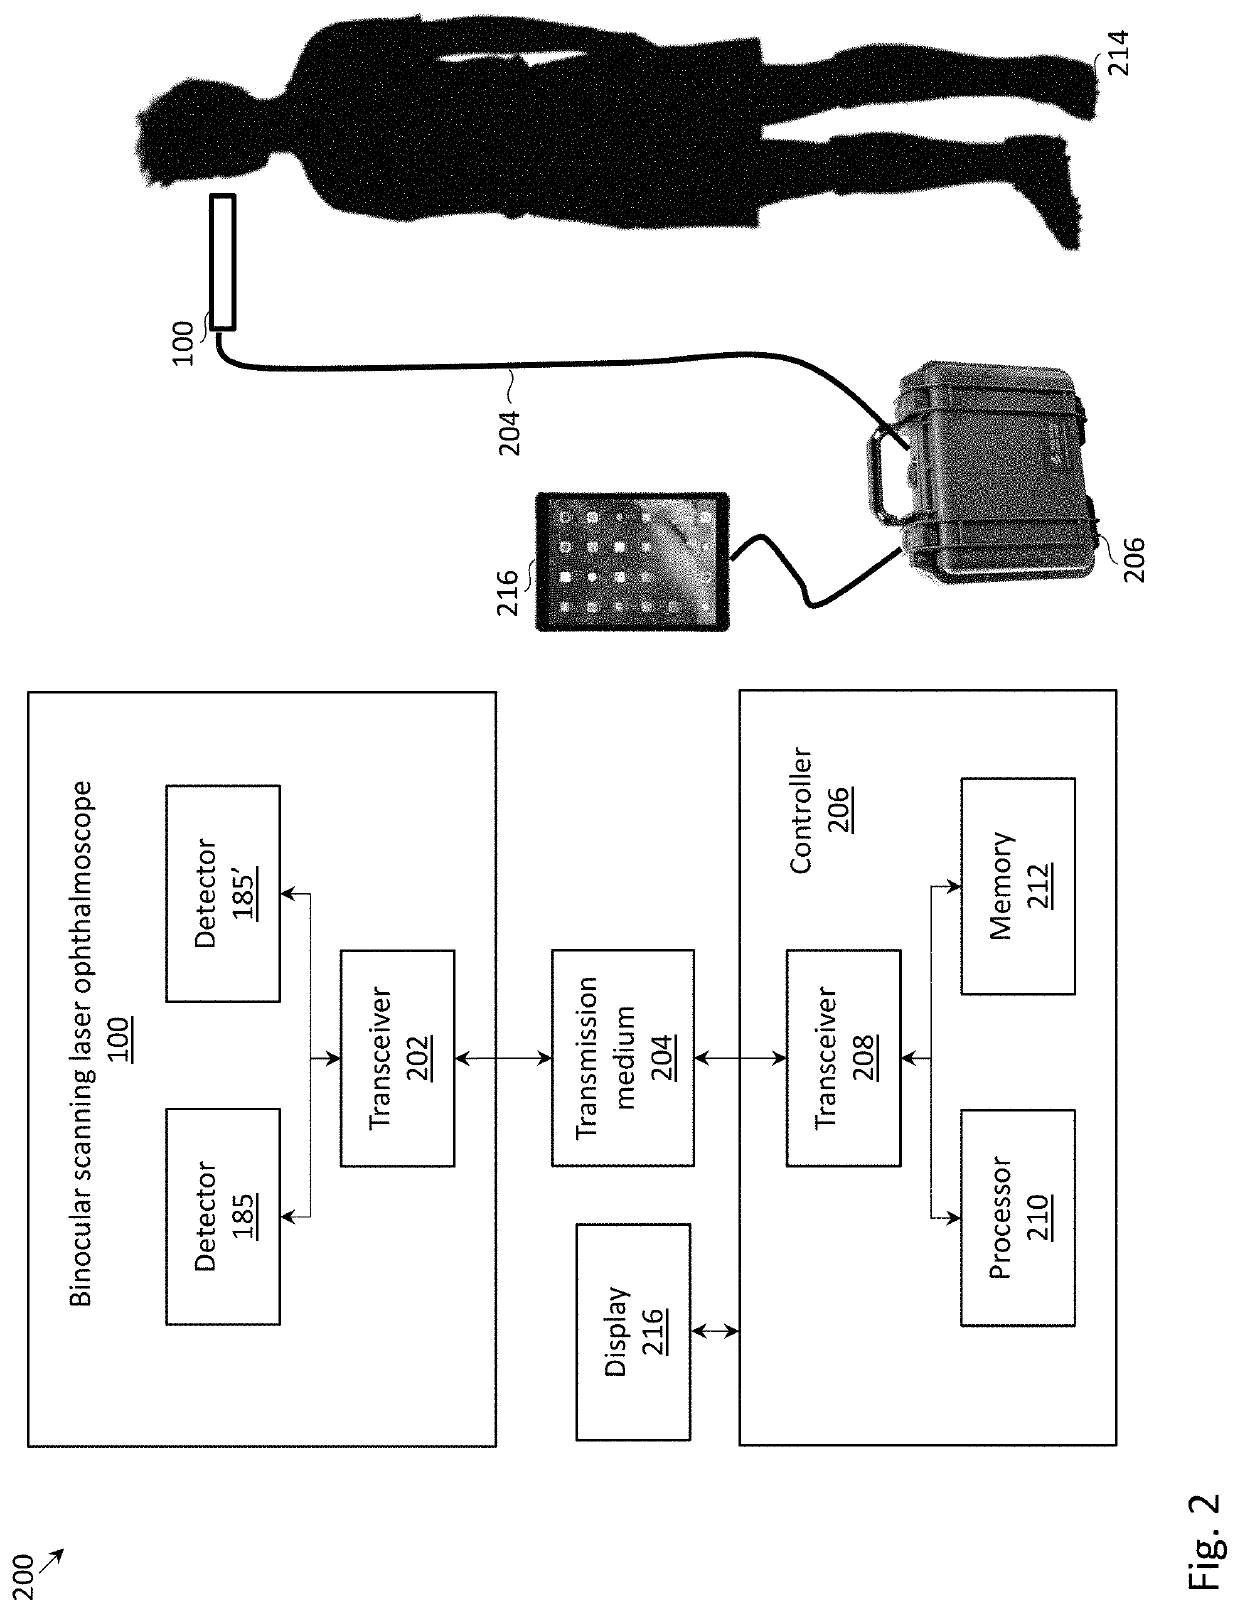 Binocular retinal imaging device, system, and method for tracking fixational eye motion